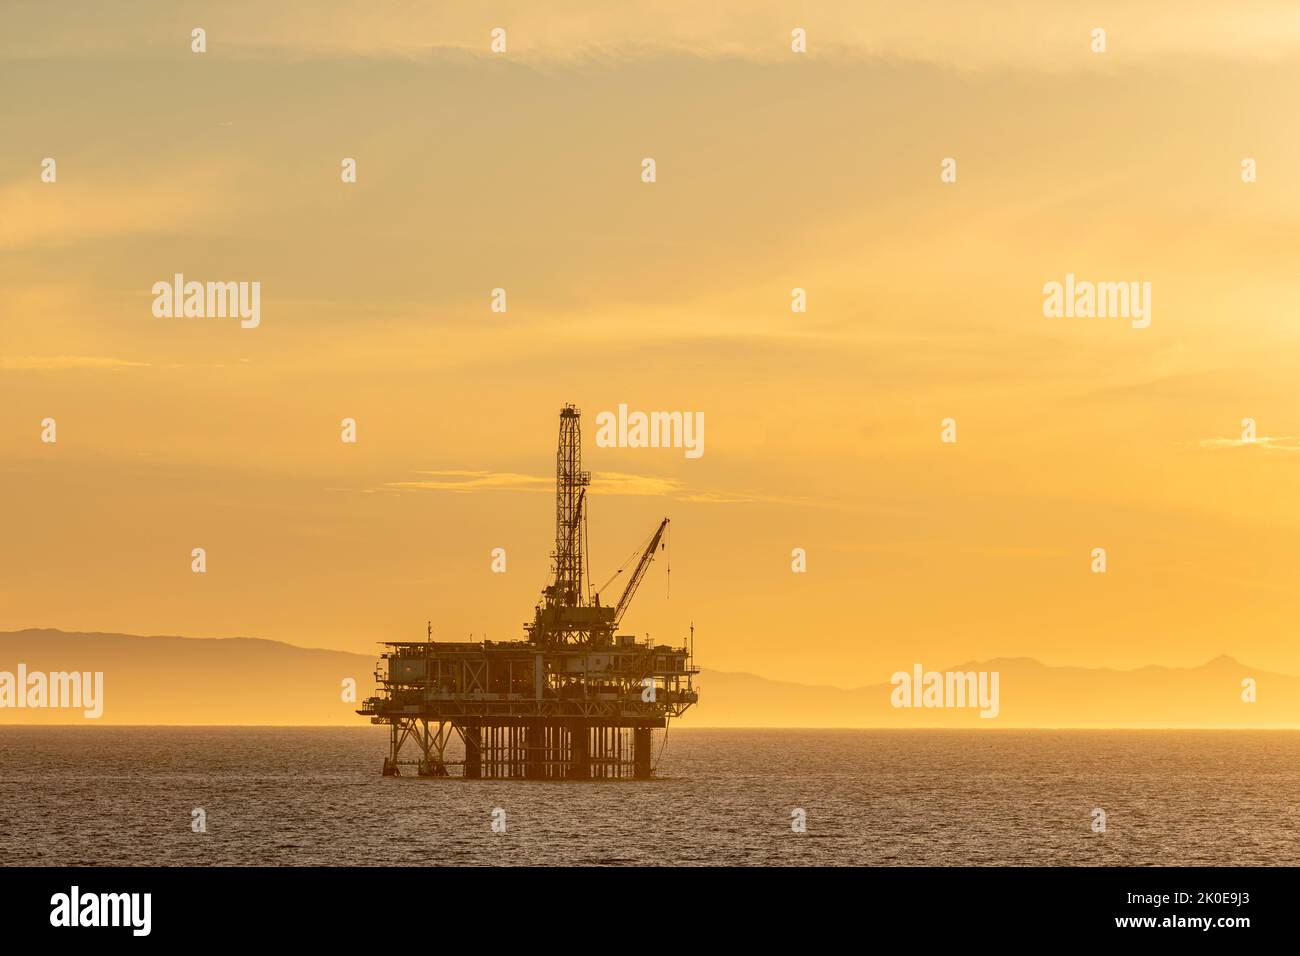 Dramatic image of an offshore oil platform off the coast of California against a yellow winter sky as the sun sets. Stock Photo